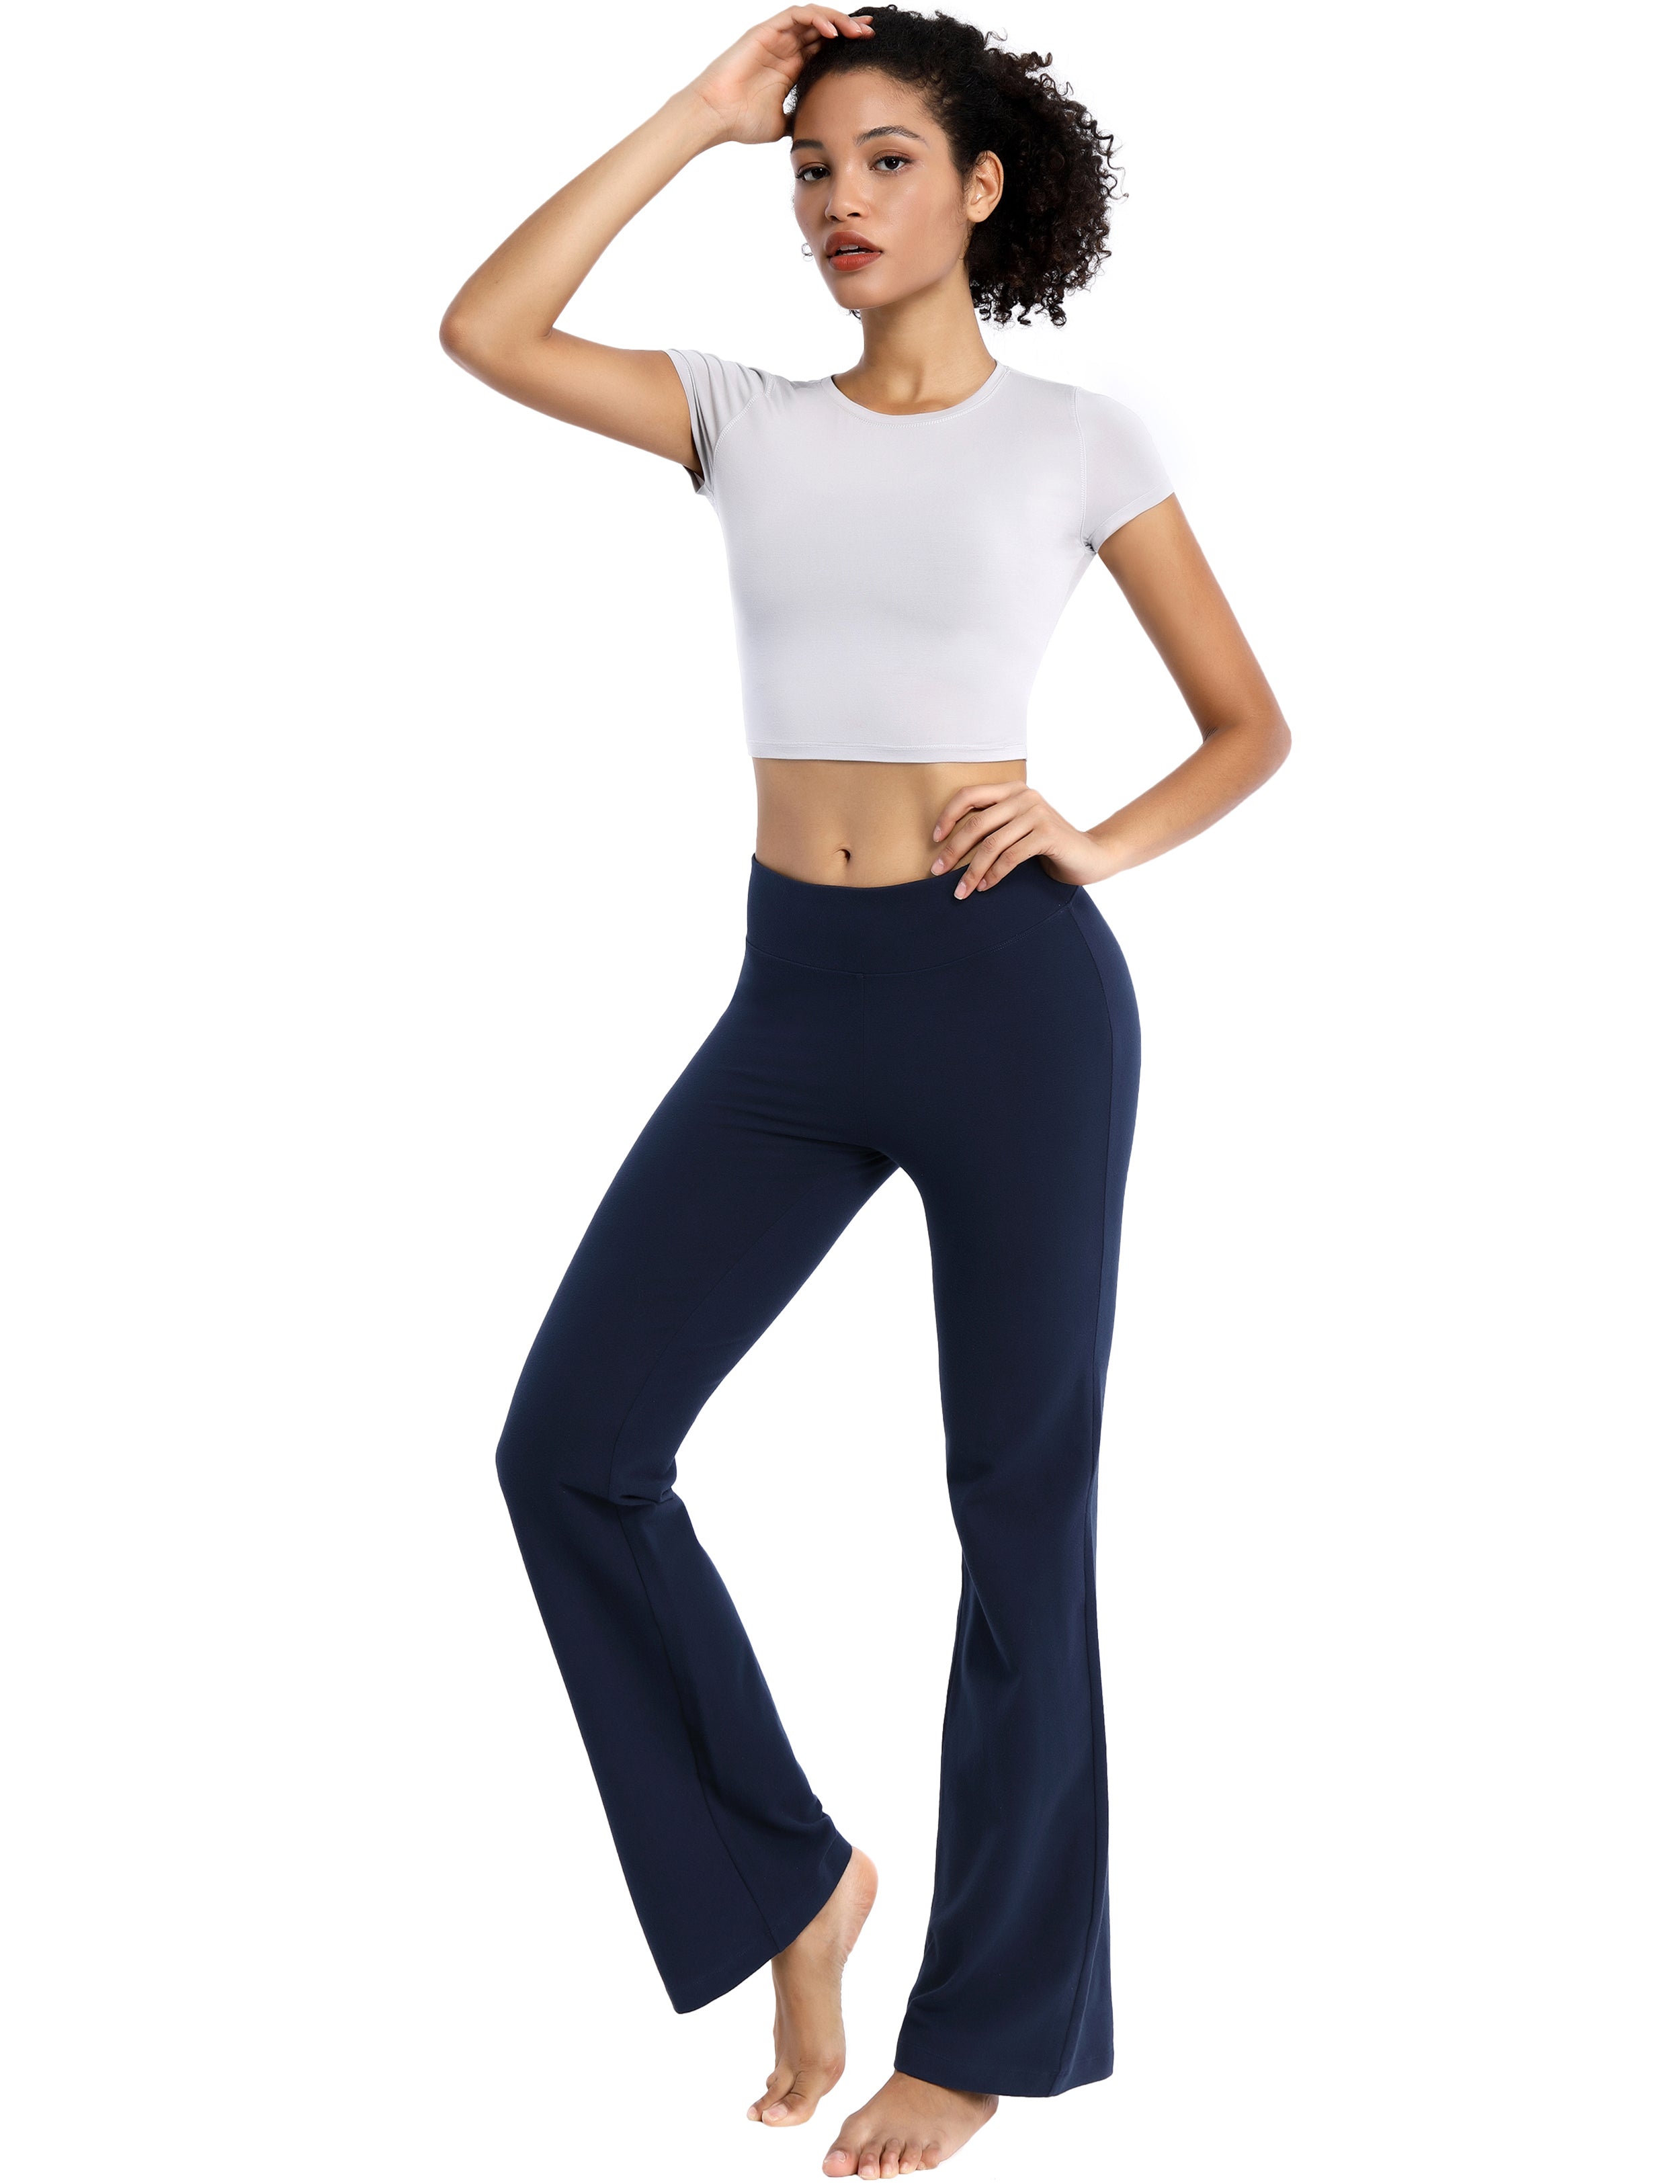 Cotton Bootcut Leggings darknavy 90%Cotton/10%Spandex (soft and cotton feel) Fabric doesn't attract lint easily 4-way stretch No see-through Moisture-wicking Inner pocket Four lengths